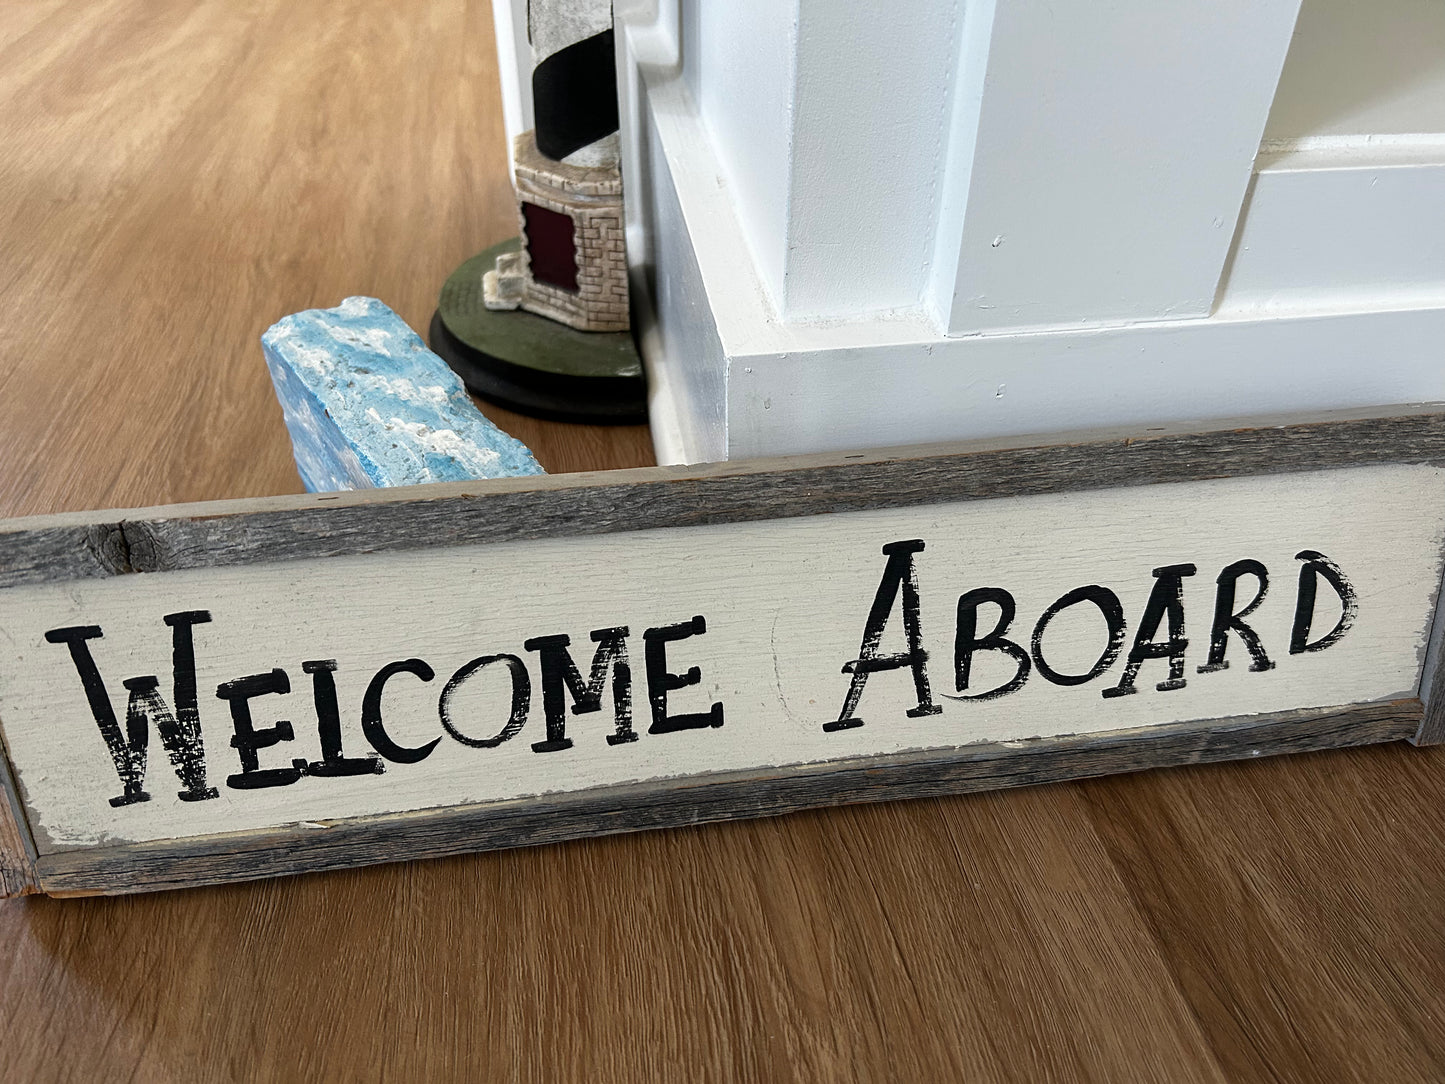 Sign - "Welcome Aboard"